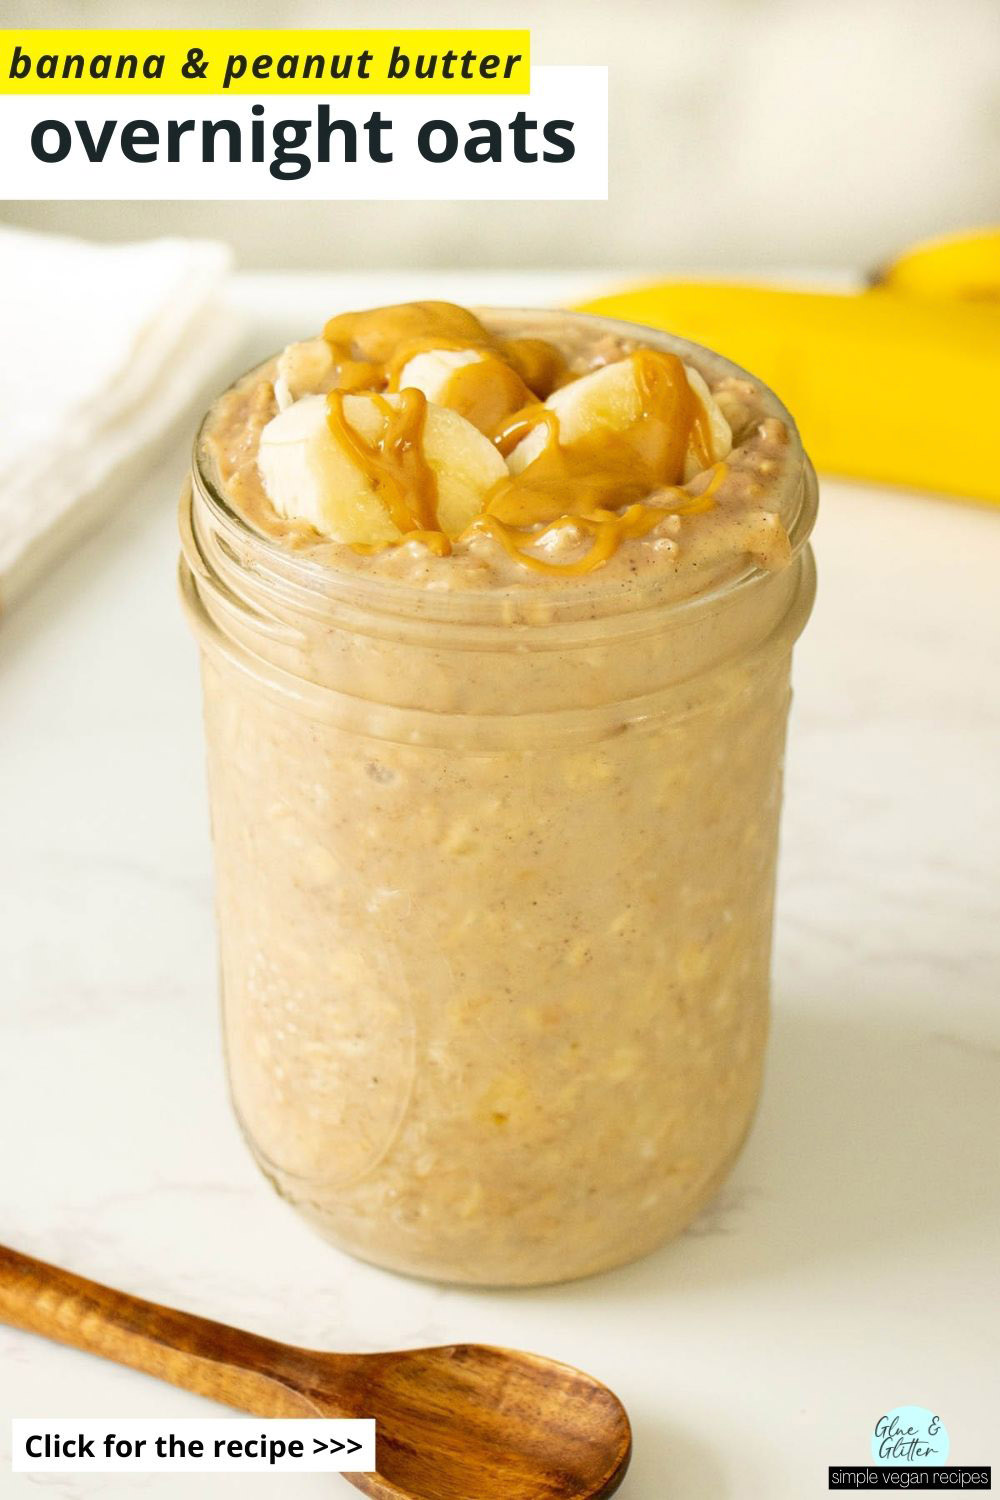 jar of banana and peanut butter overnight oats with slices of banana and a peanut butter drizzle on top, text overlay